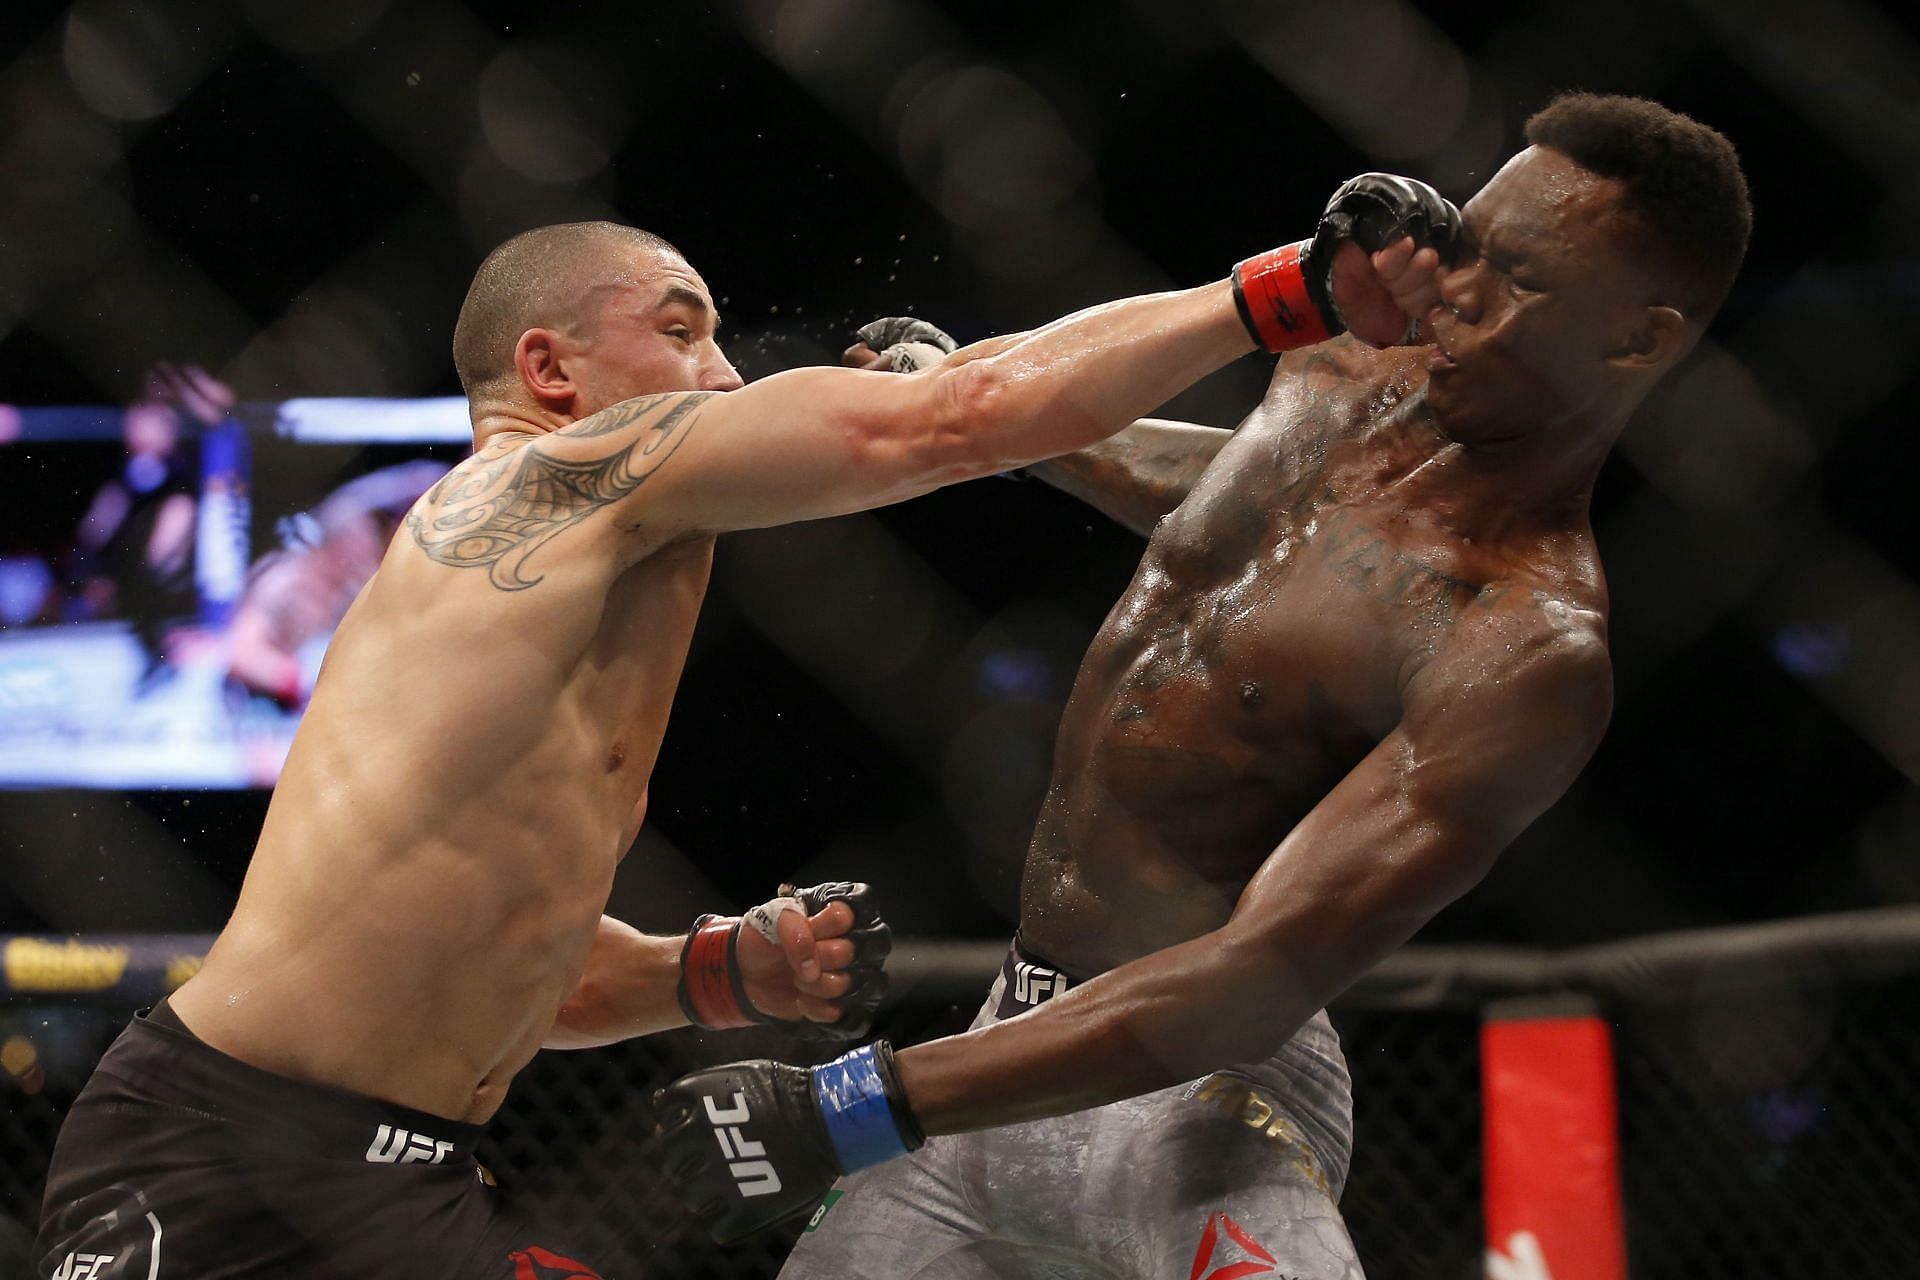 Robert Whittaker and Israel Adesanya are set to rematch at UFC 271